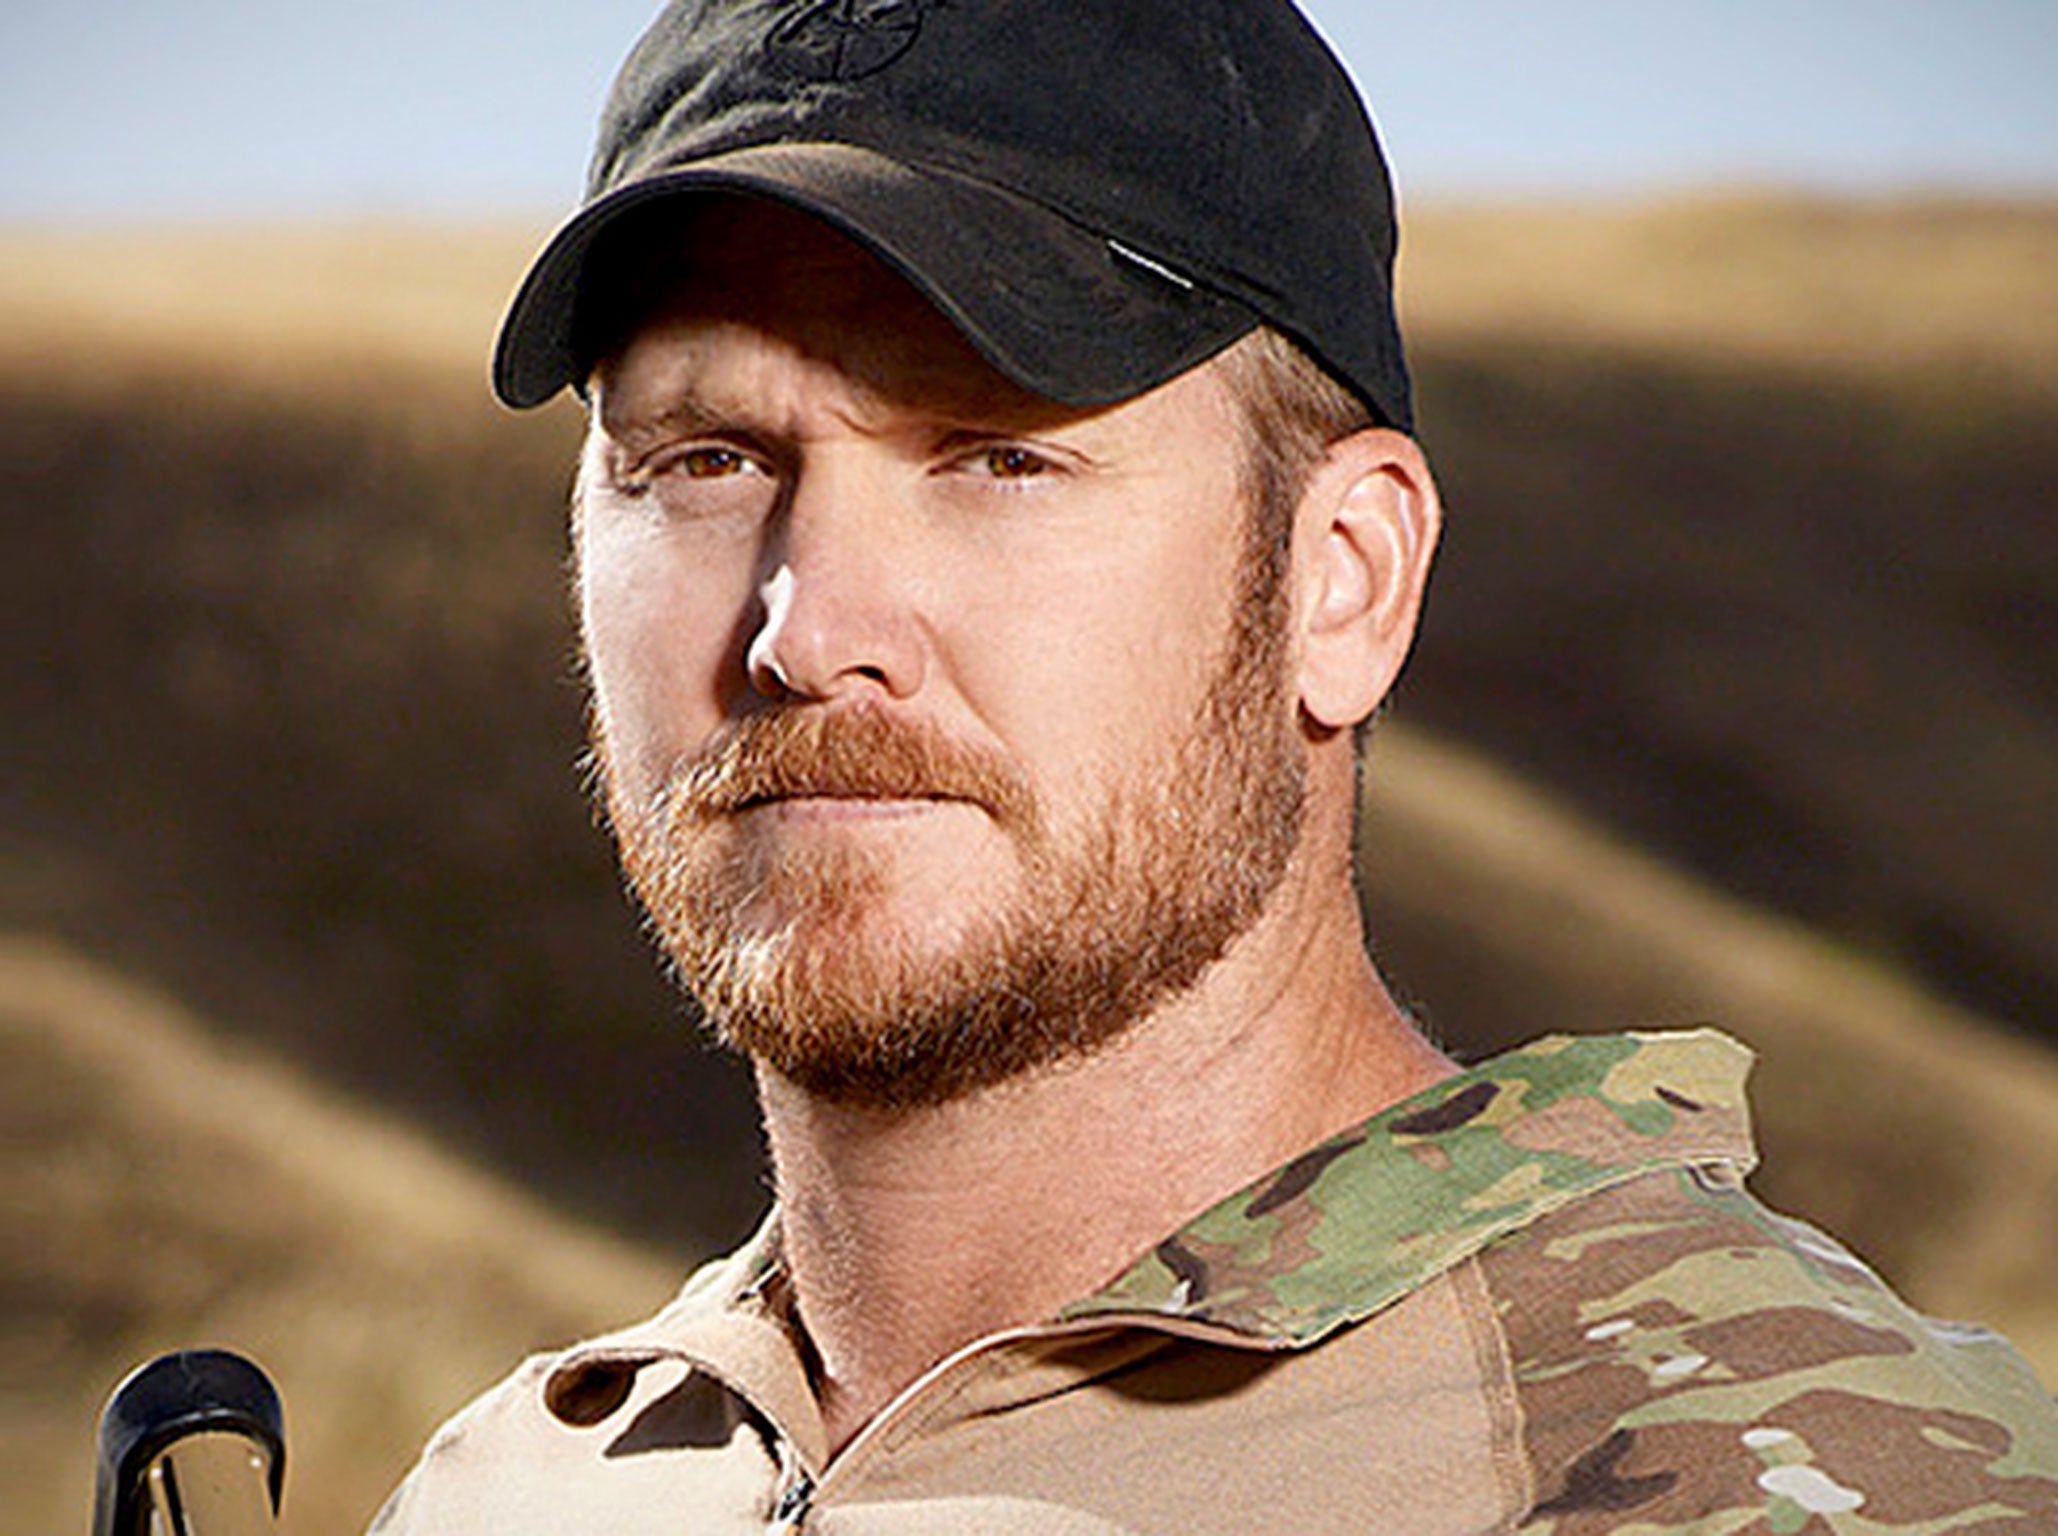 American Sniper showed 'why we do what we do,' a former sniper has said